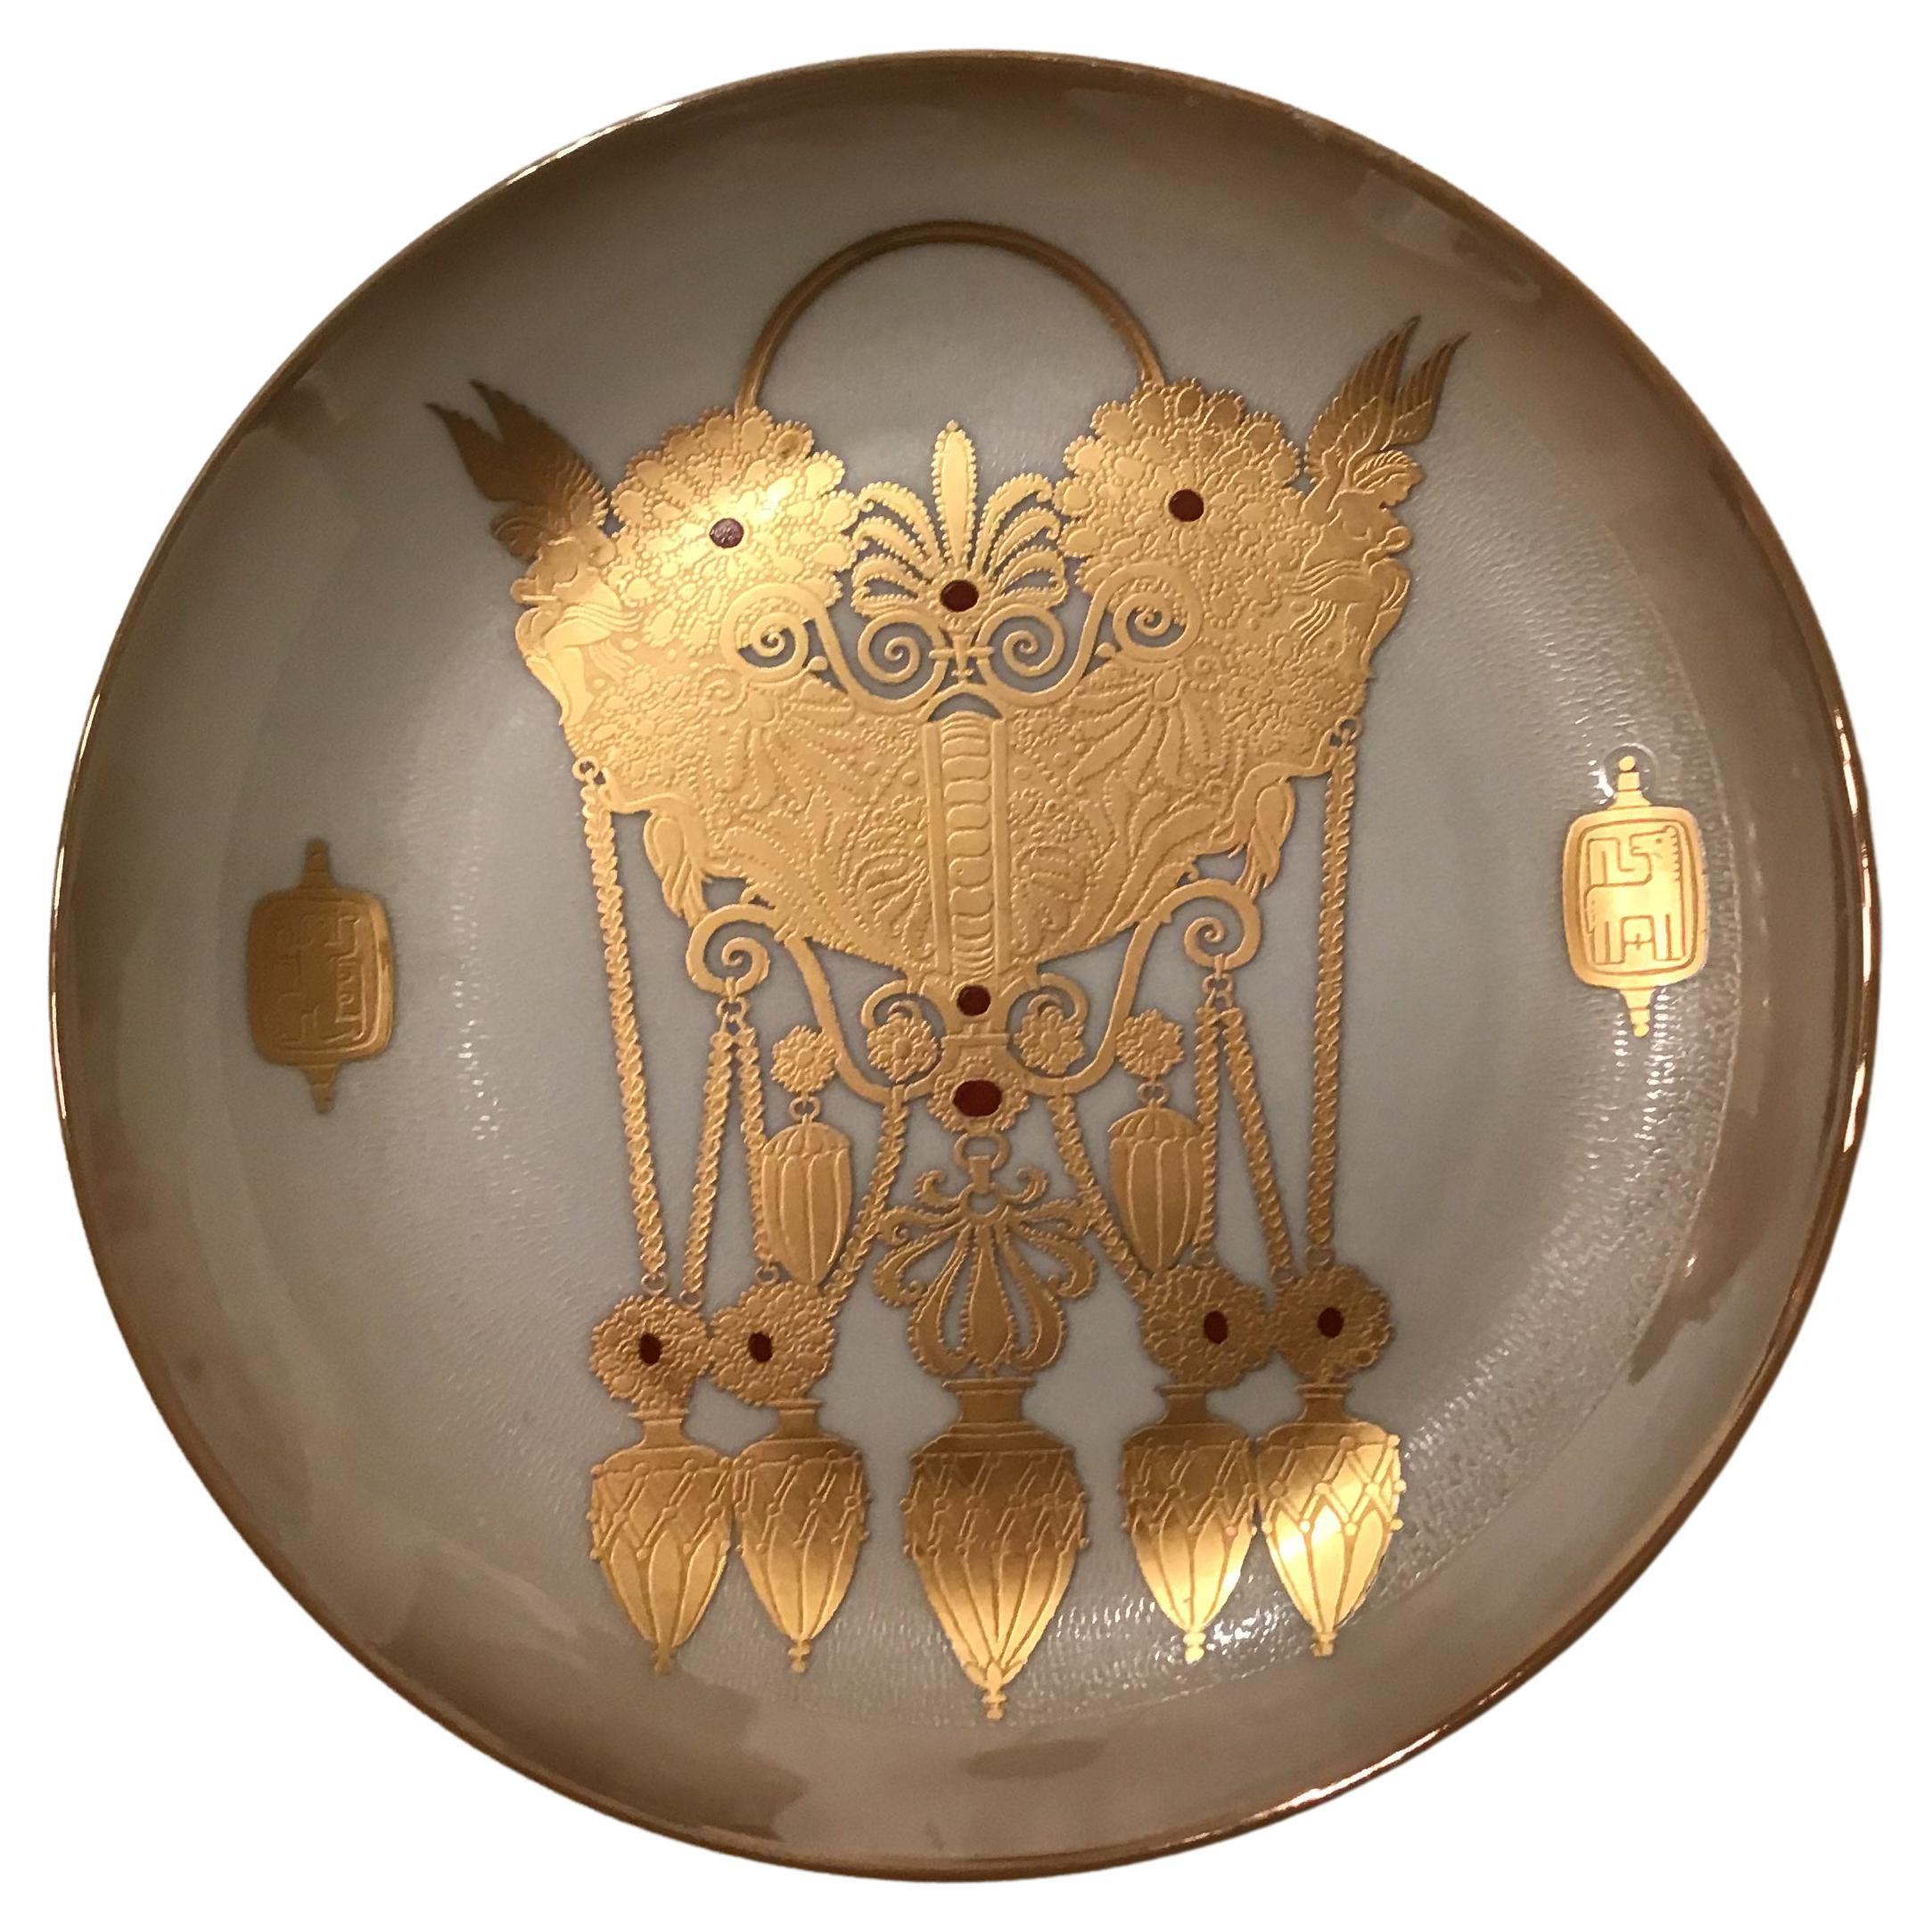 Morbelli Porcelain Wall Plate “Gioielli Italici”, 1987 Italy  For Sale